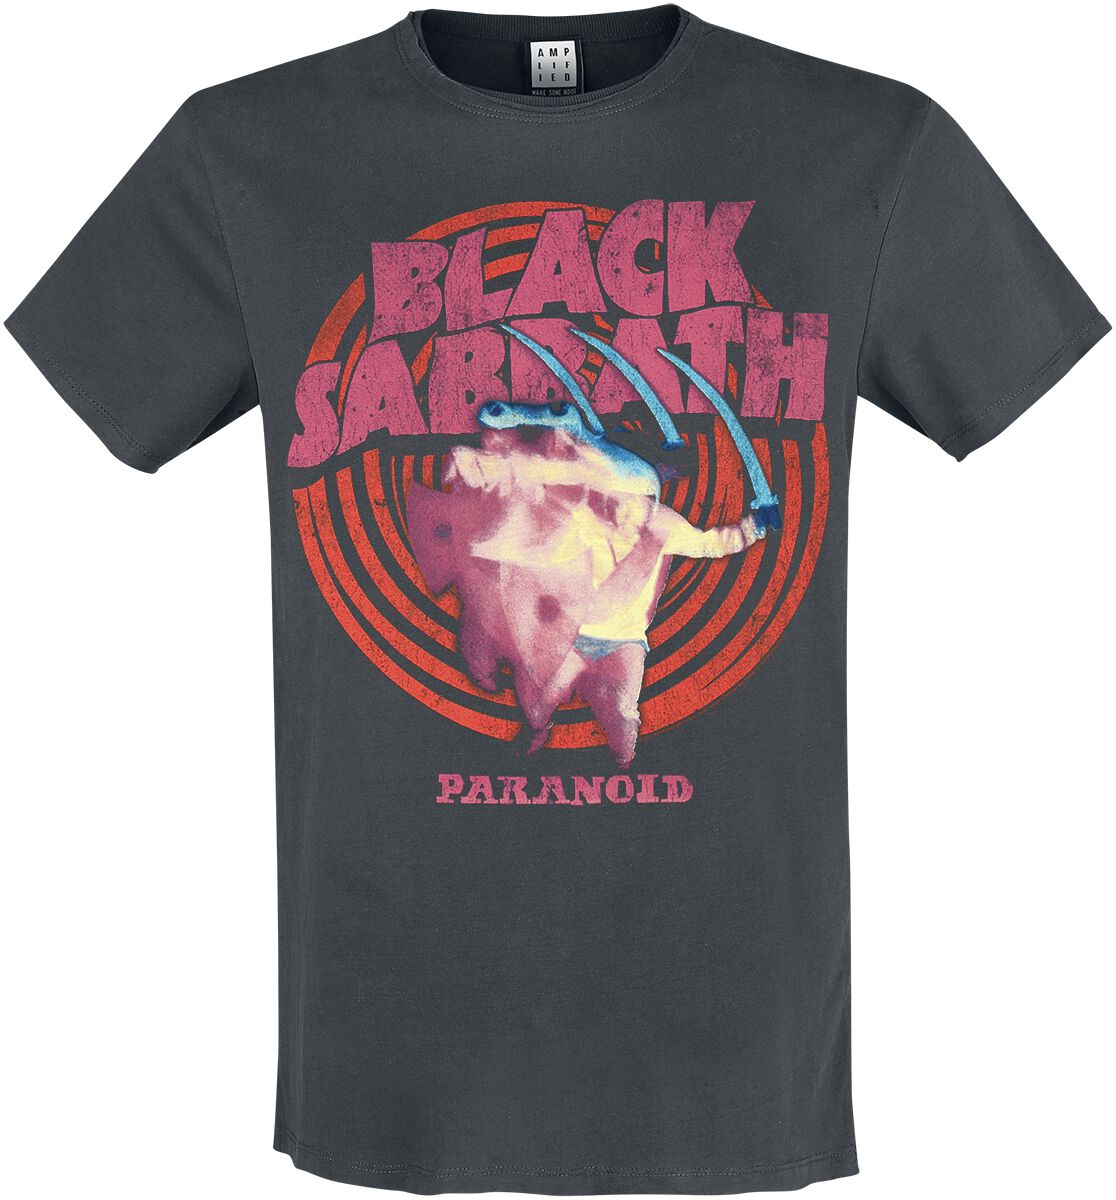 Black Sabbath Amplified Collection - Paranoid T-Shirt charcoal in 3XL